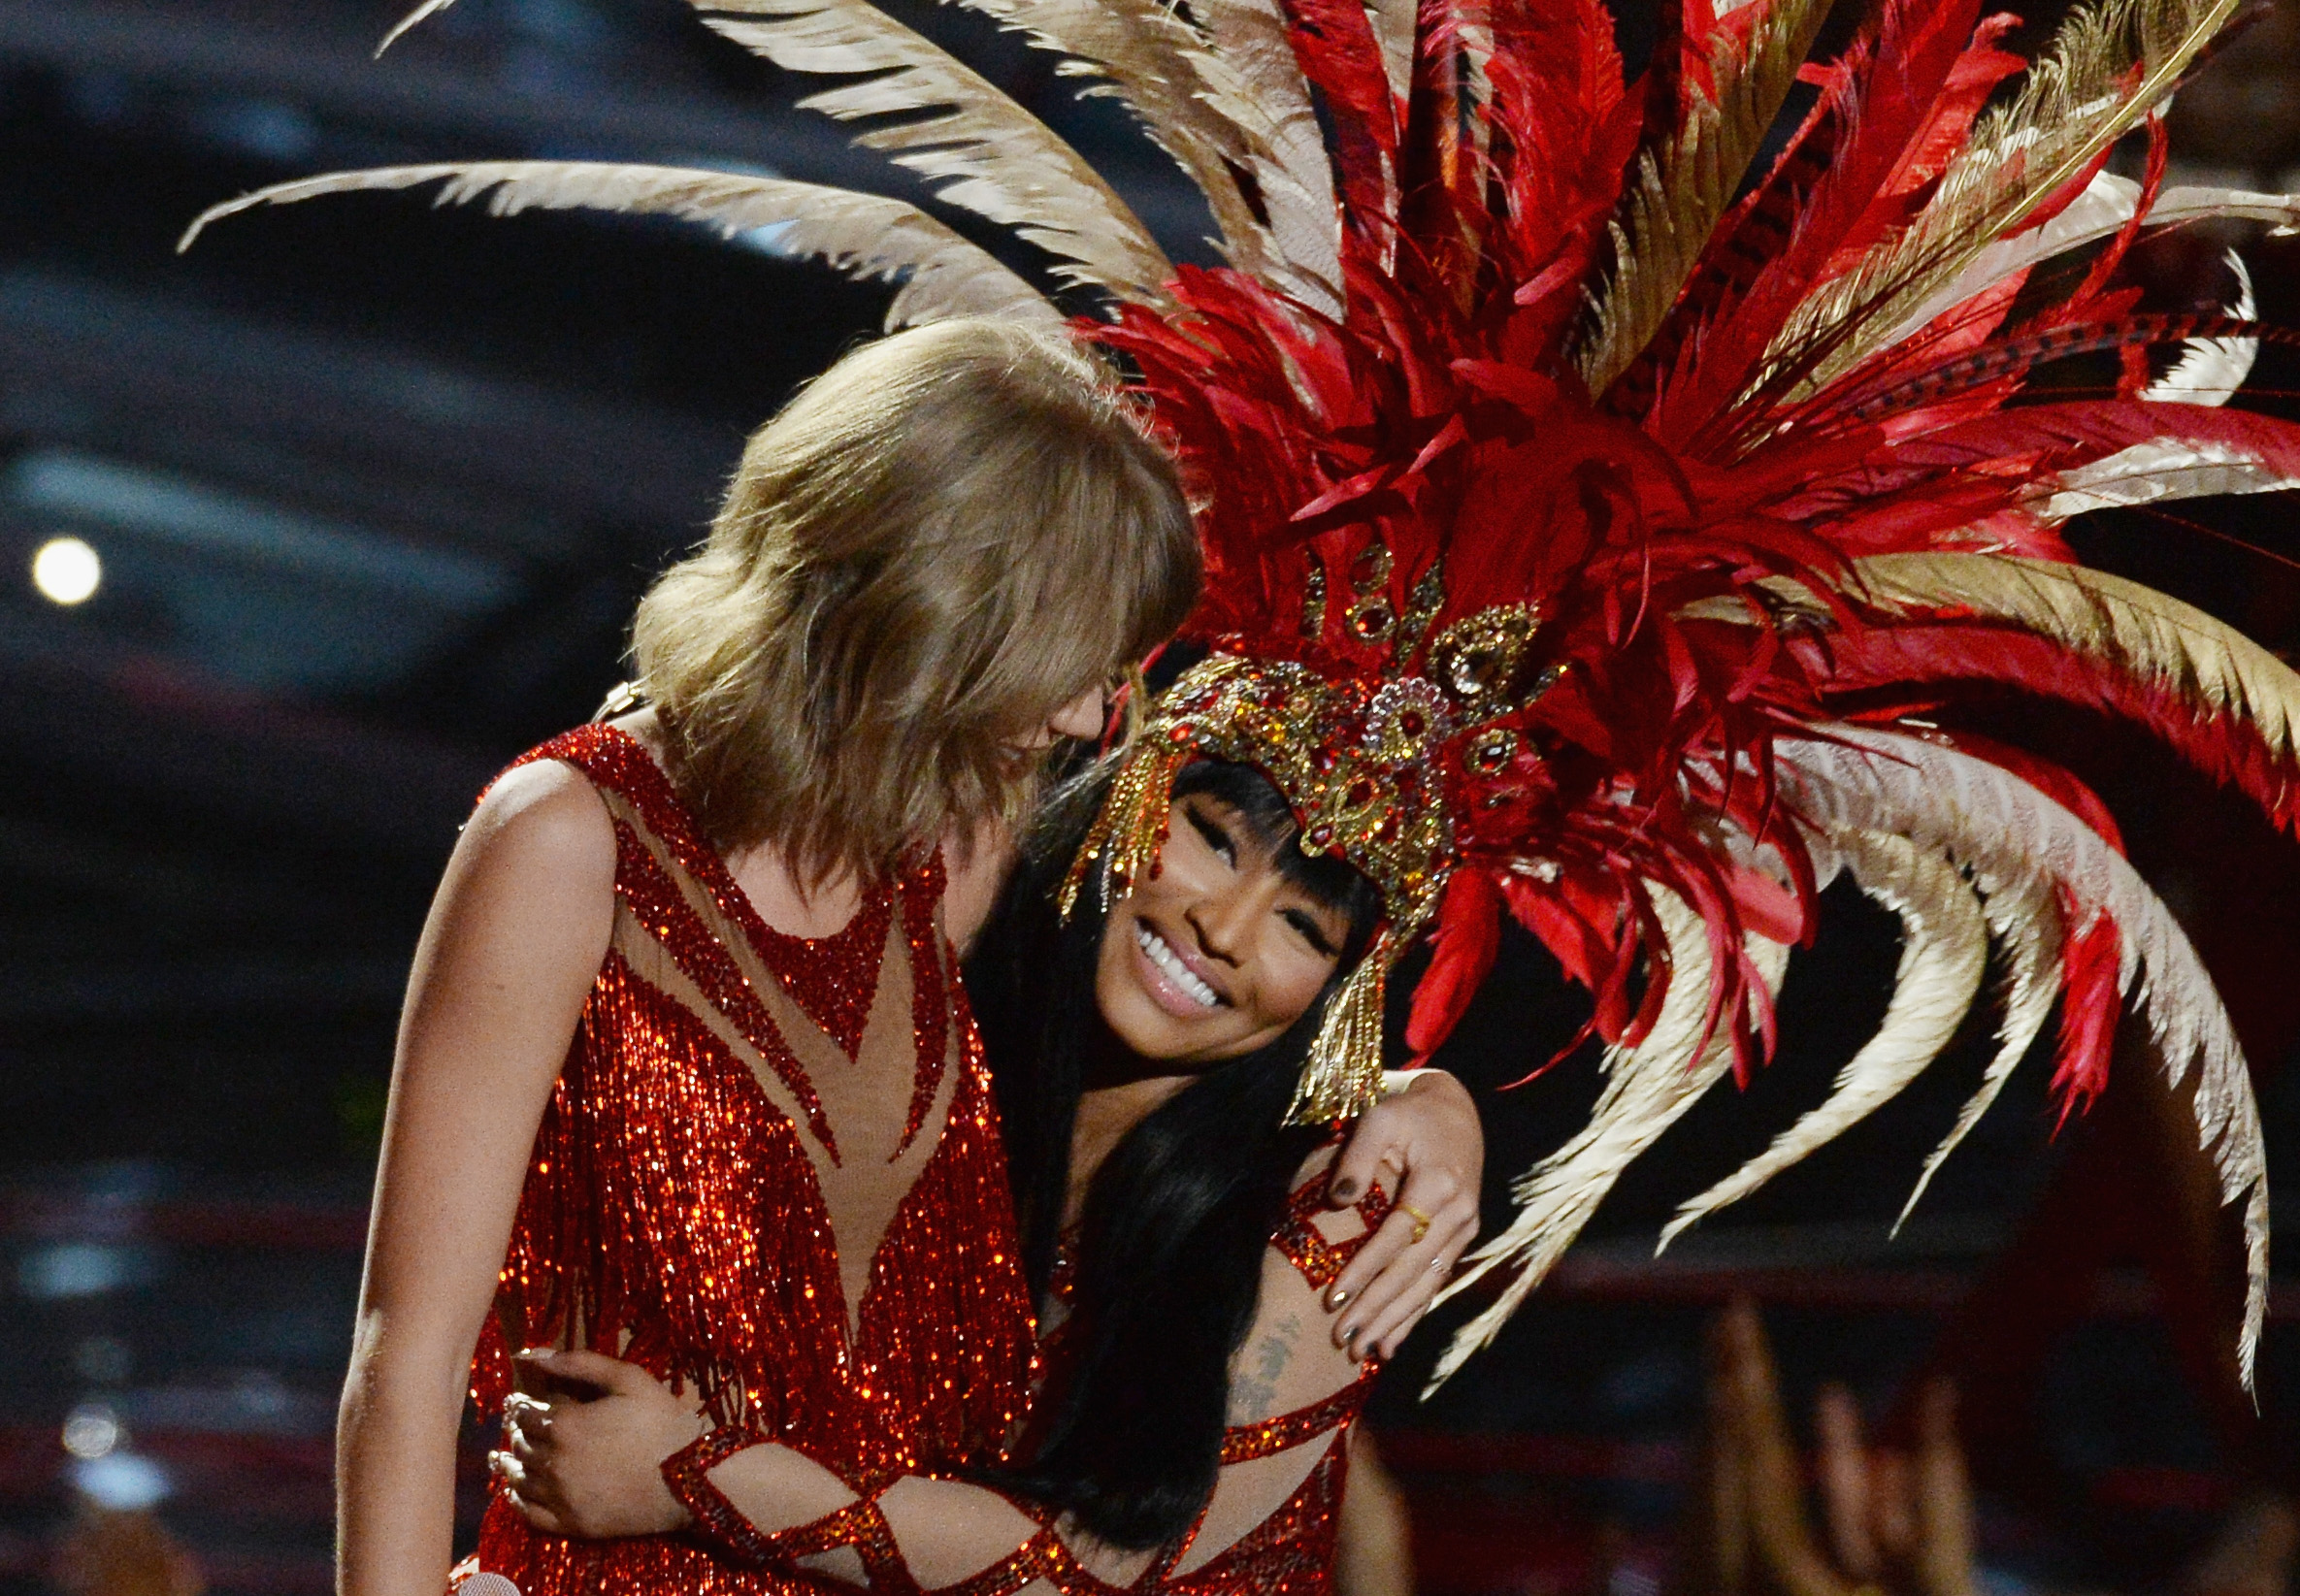 Nicki Minaj and Taylor Swift squashed their beef and performed together at the MTV VMAs For The